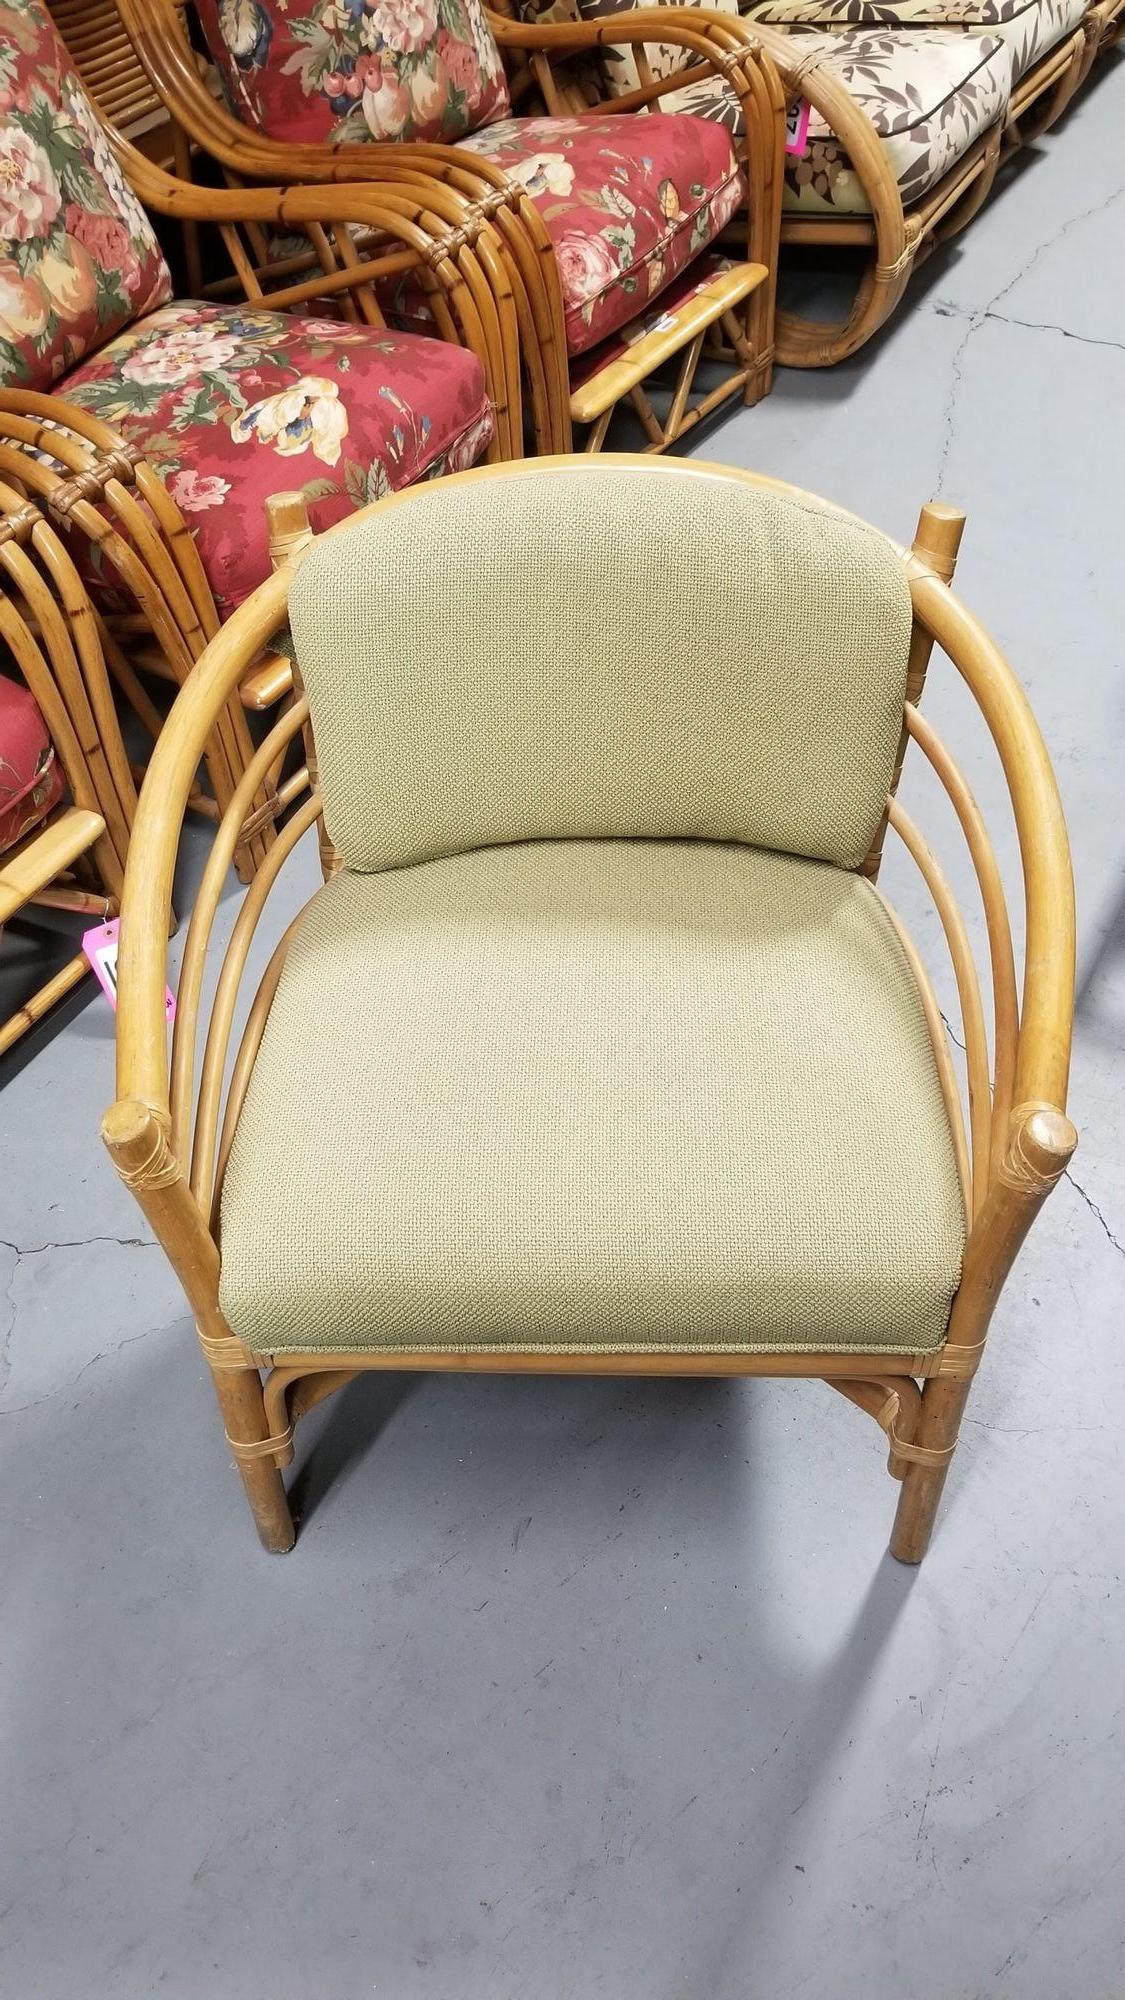 Mid-20th Century Restored Rattan Barrel Back Dining Chair Armchair W/ Skeleton Arms - Pair For Sale